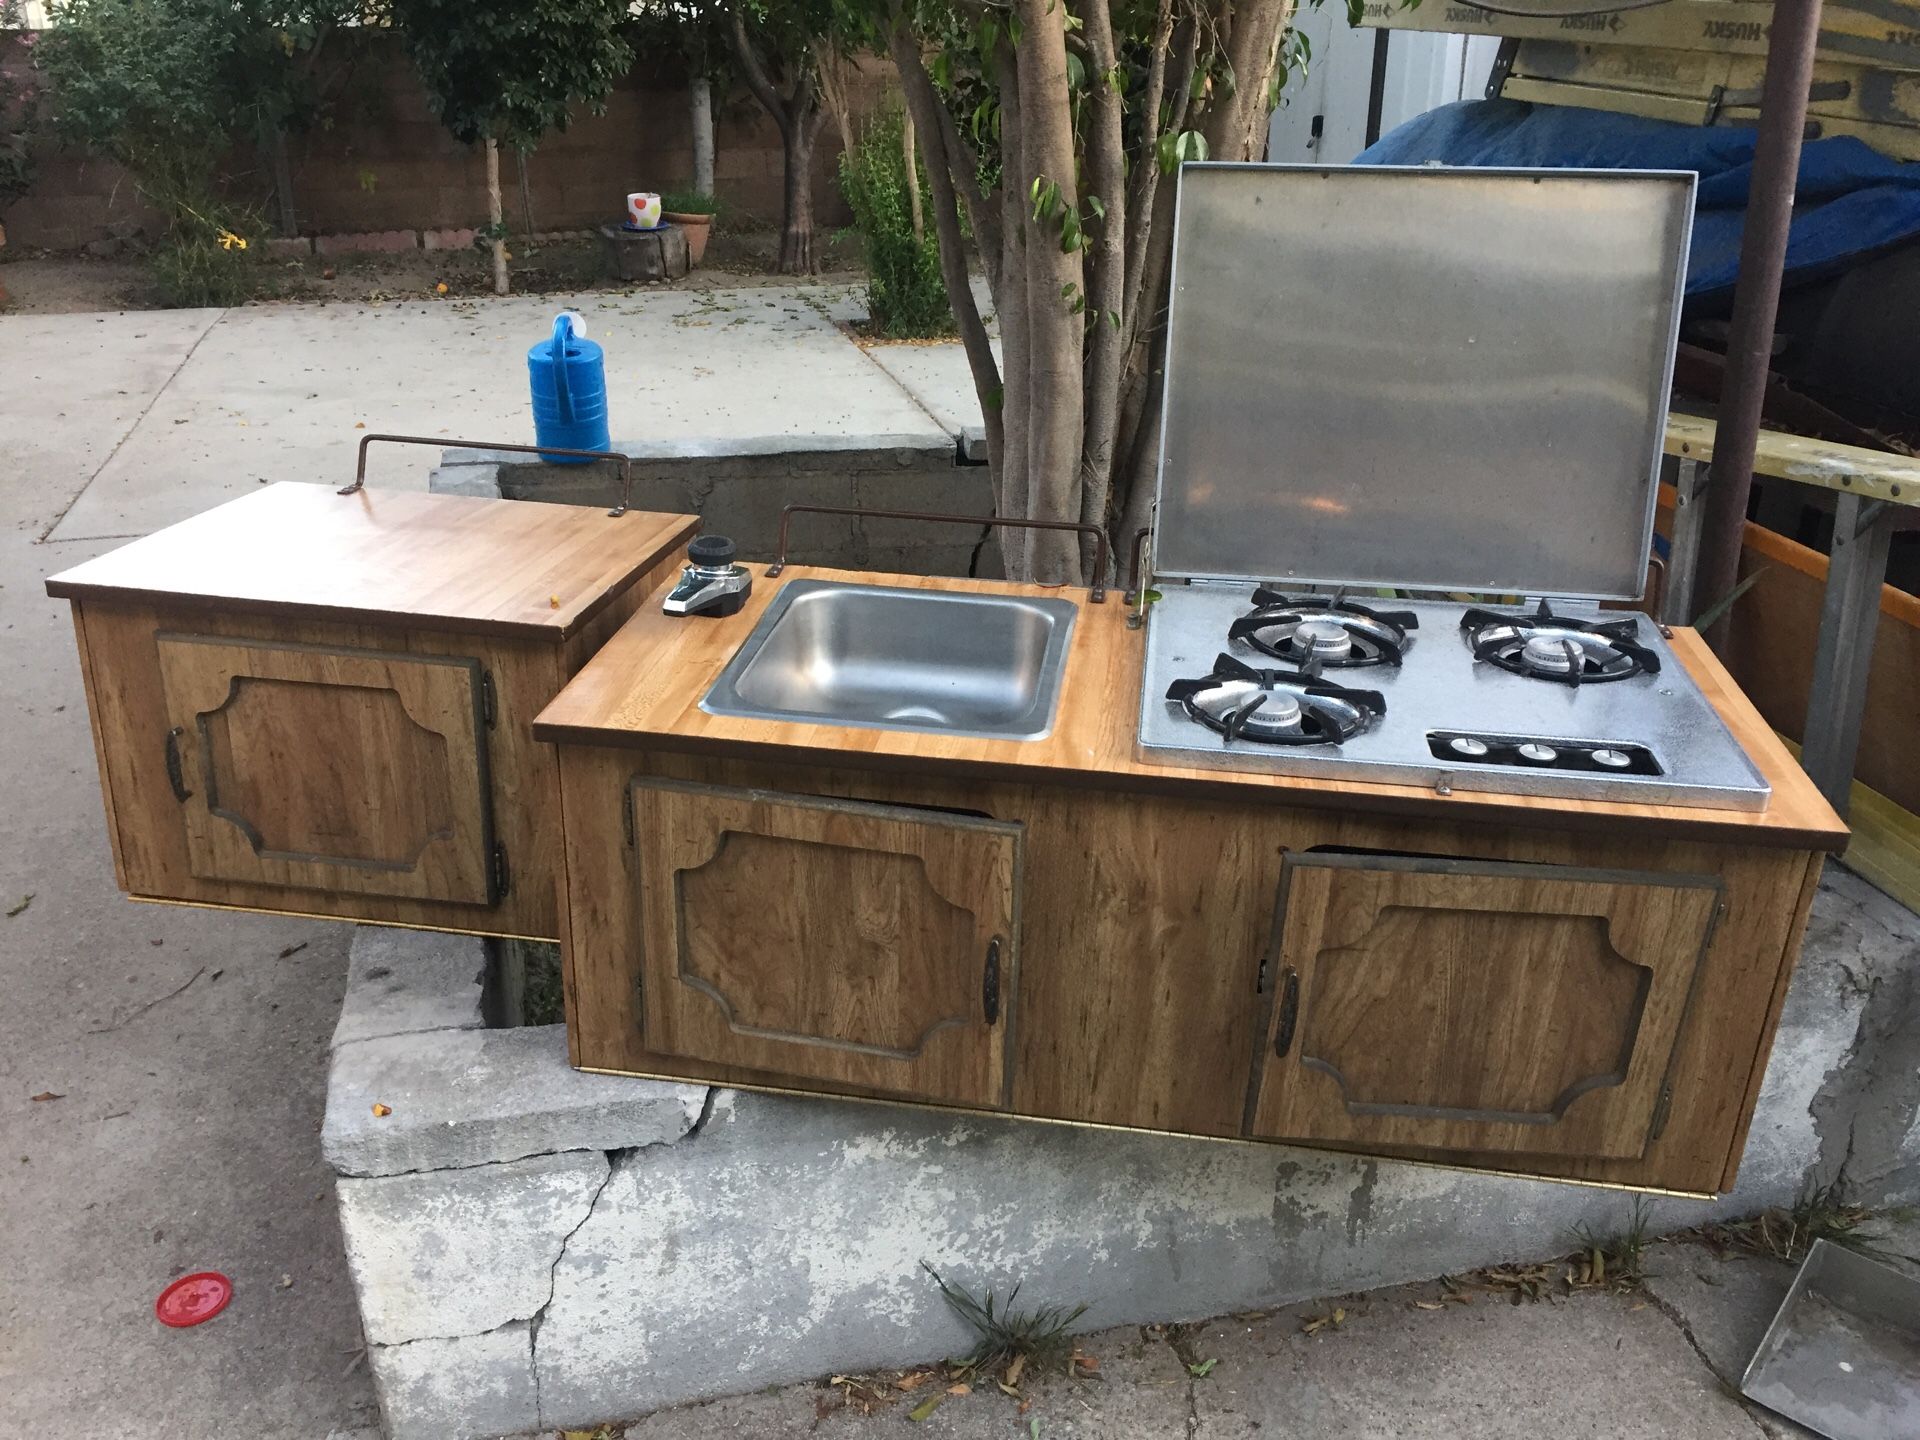 Sink and propane stove